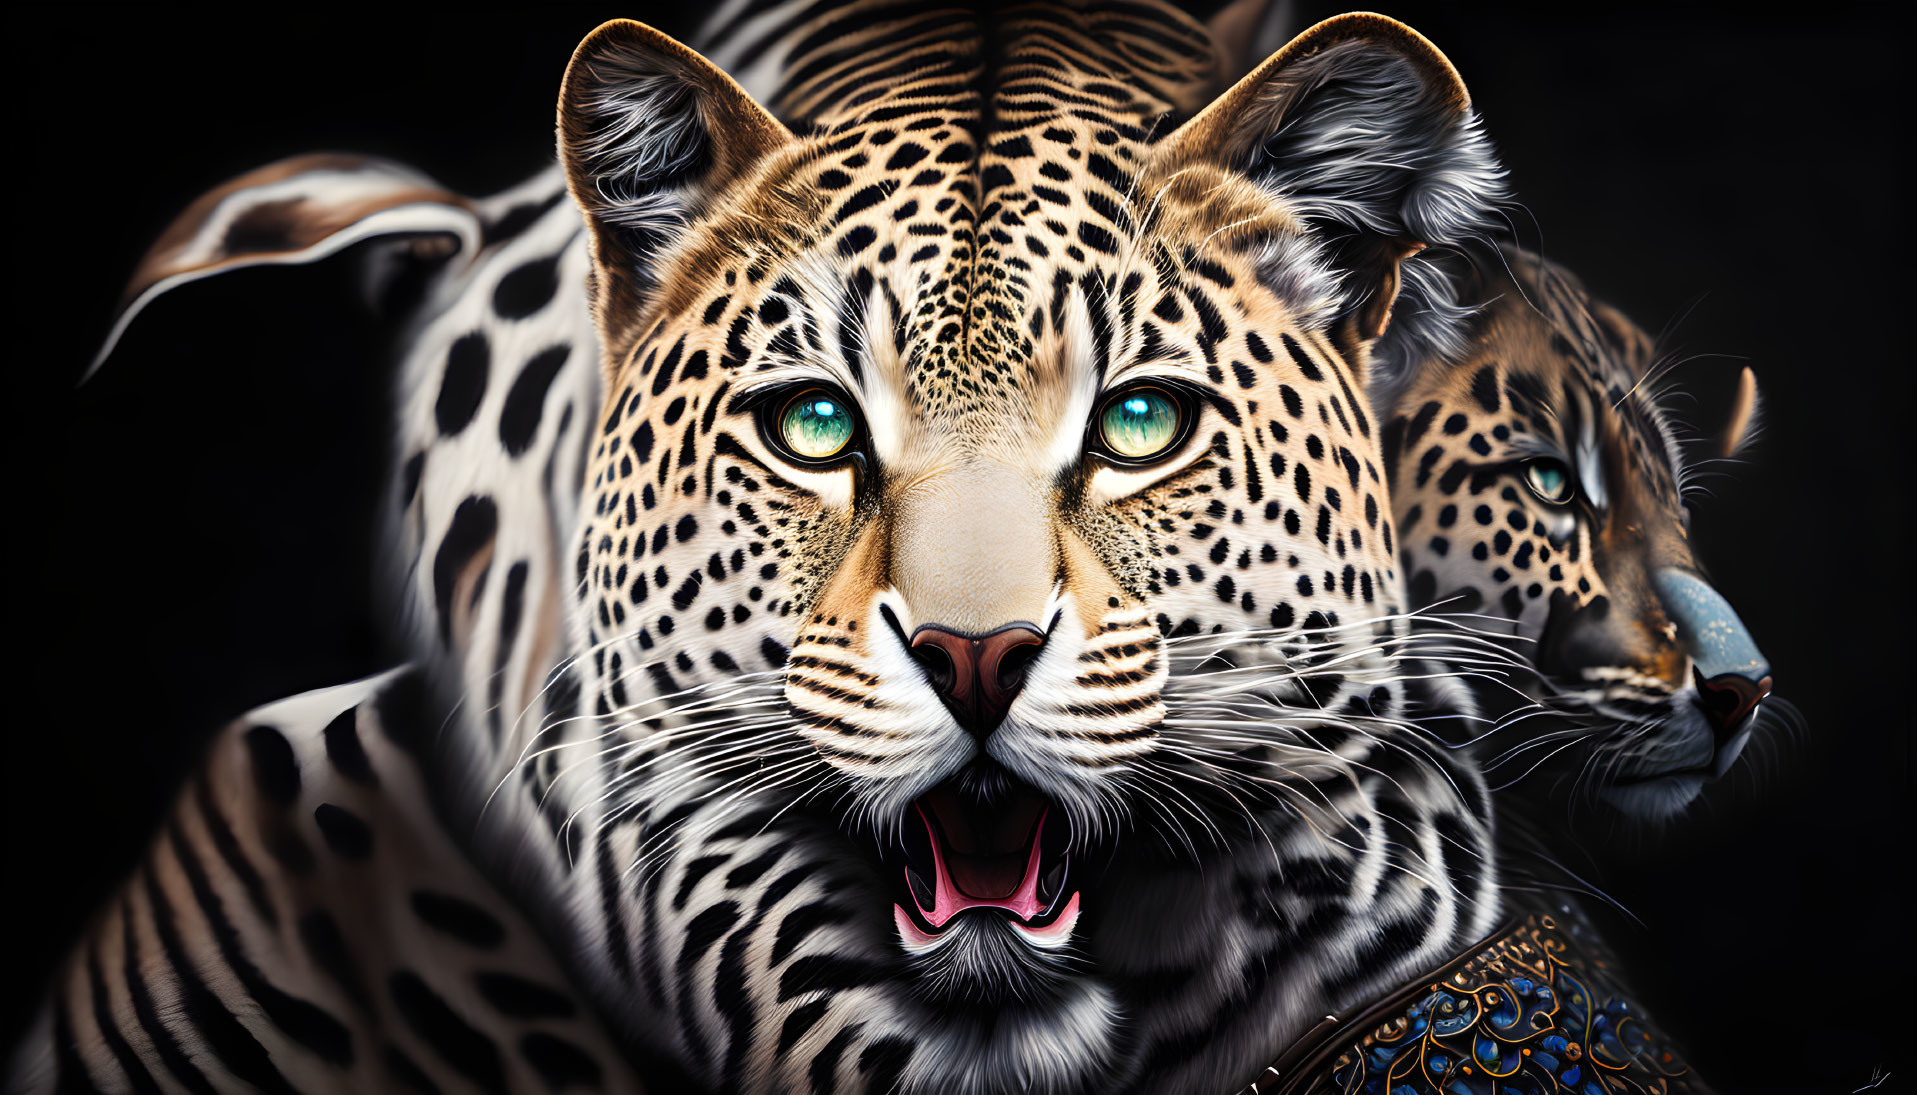 Hyper-realistic digital painting of two leopards with bright green eyes and open mouth.